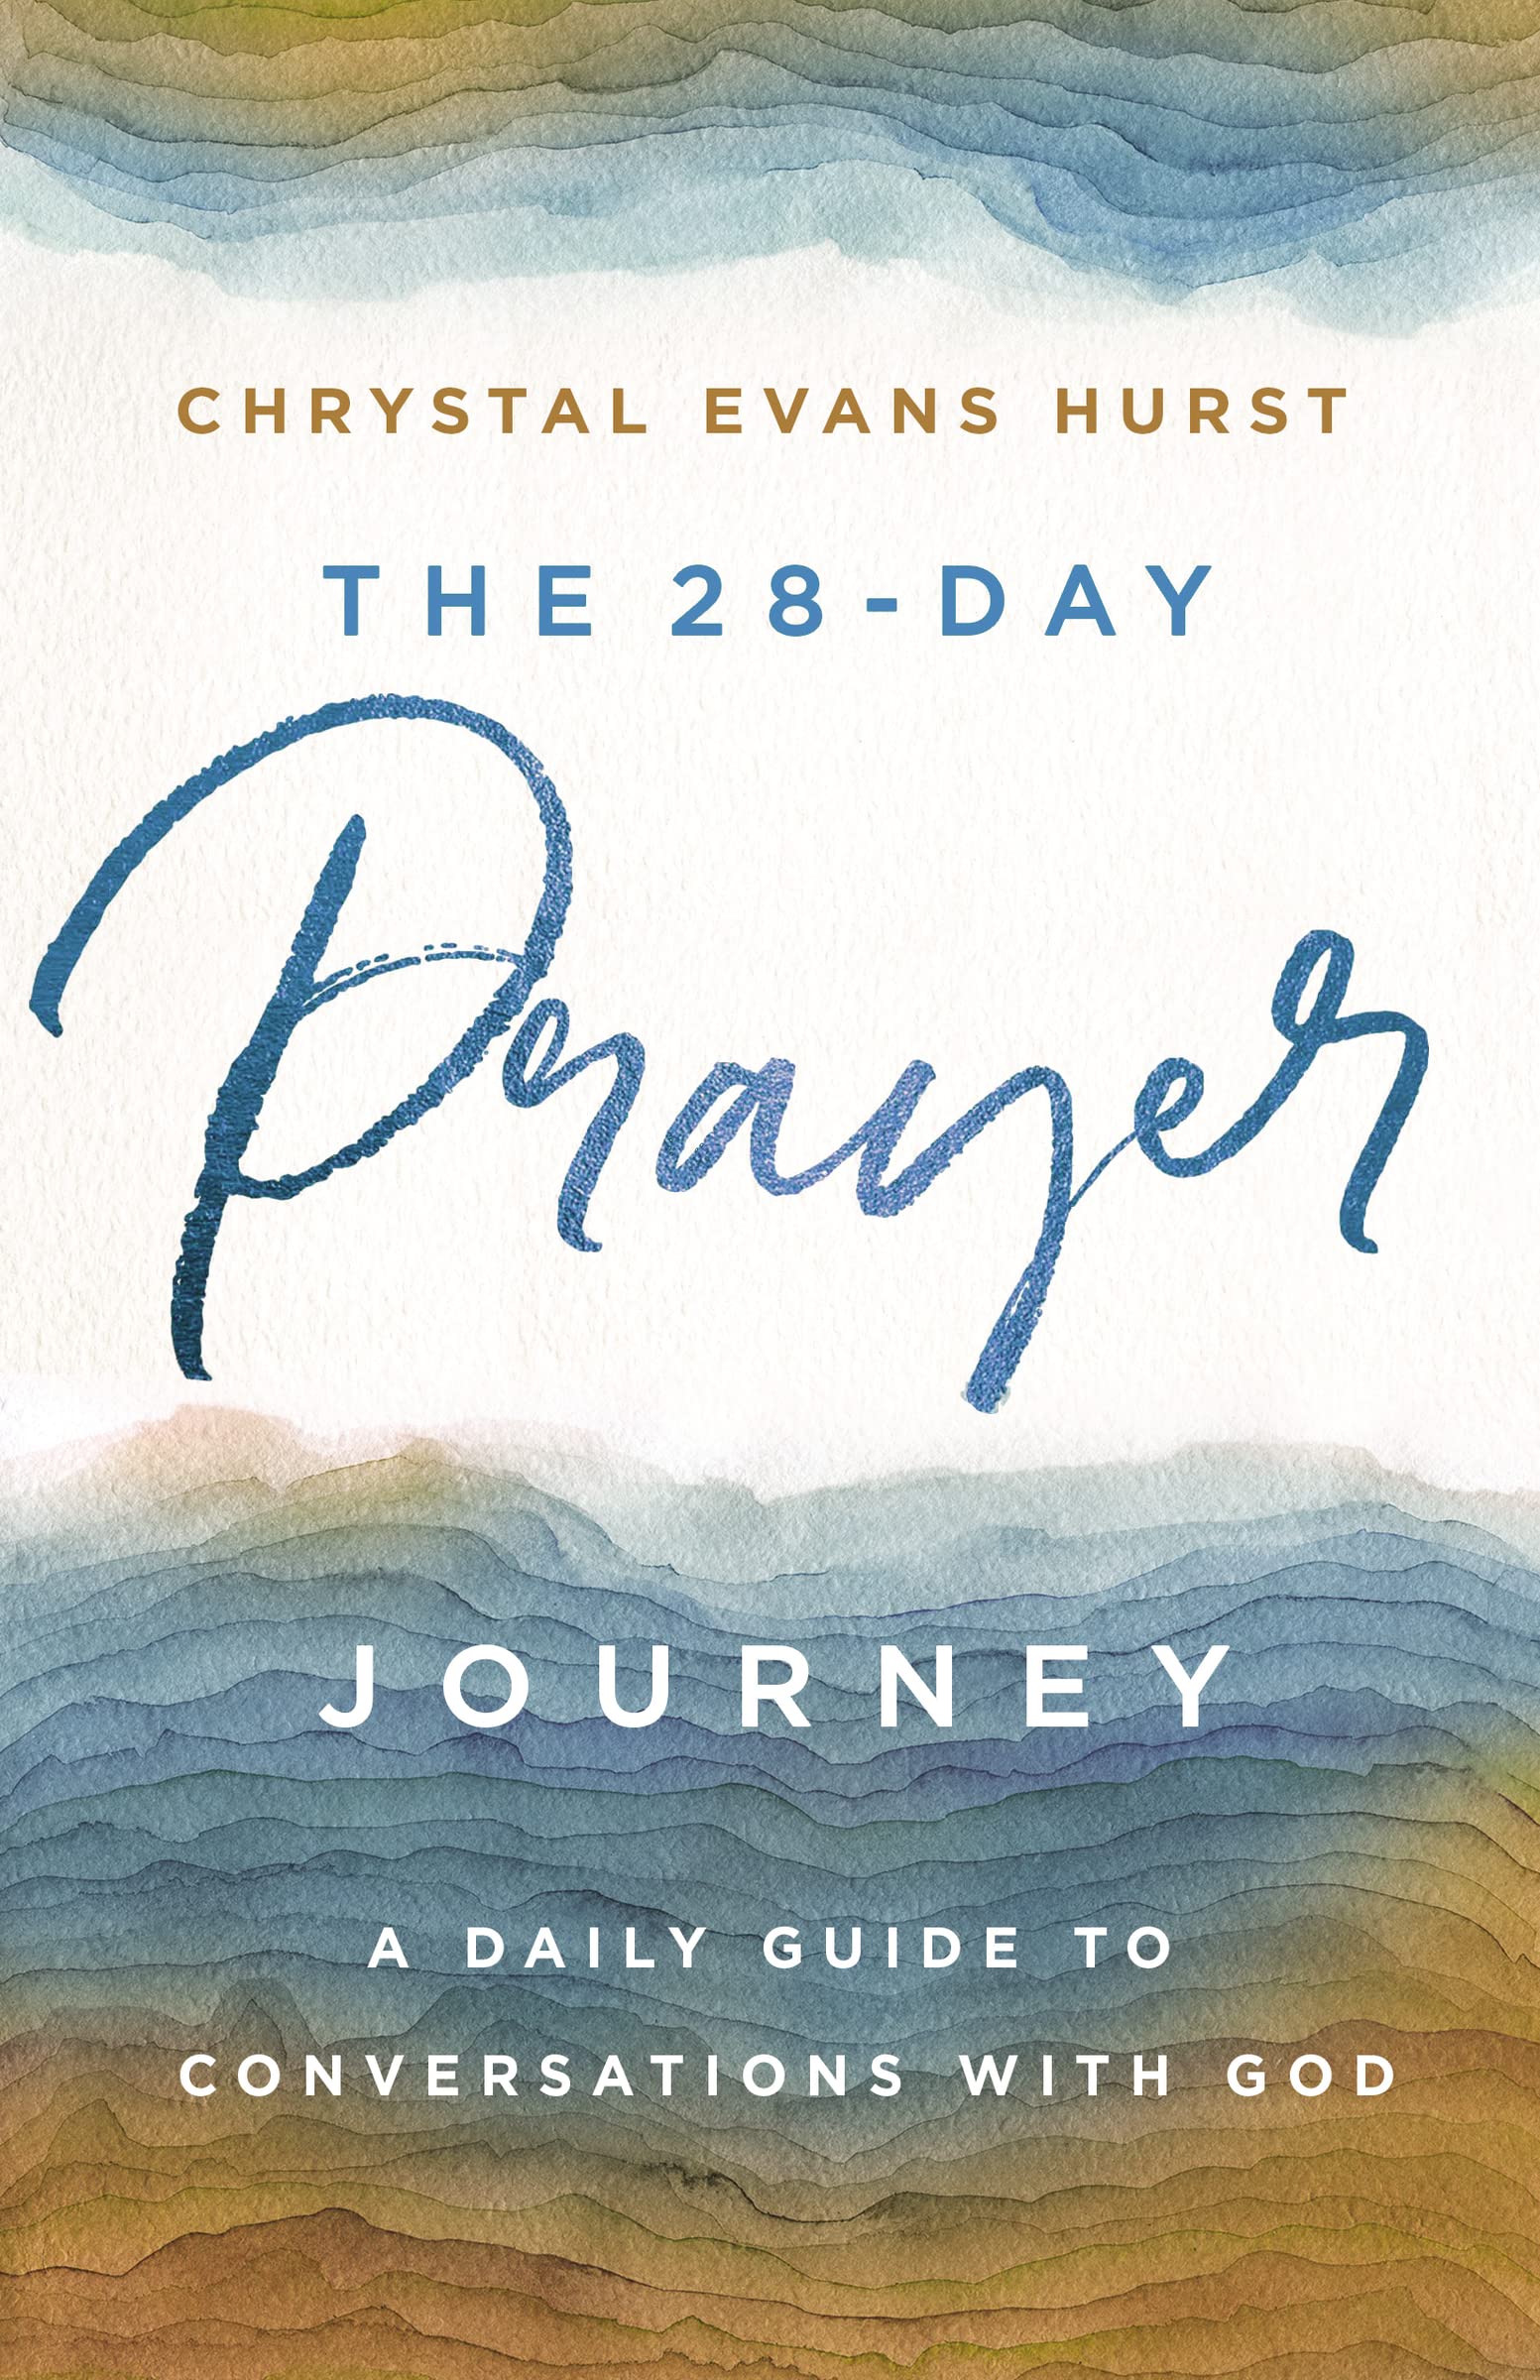 The 28-Day Prayer Journey: A Daily Guide to Conversations with God - SureShot Books Publishing LLC